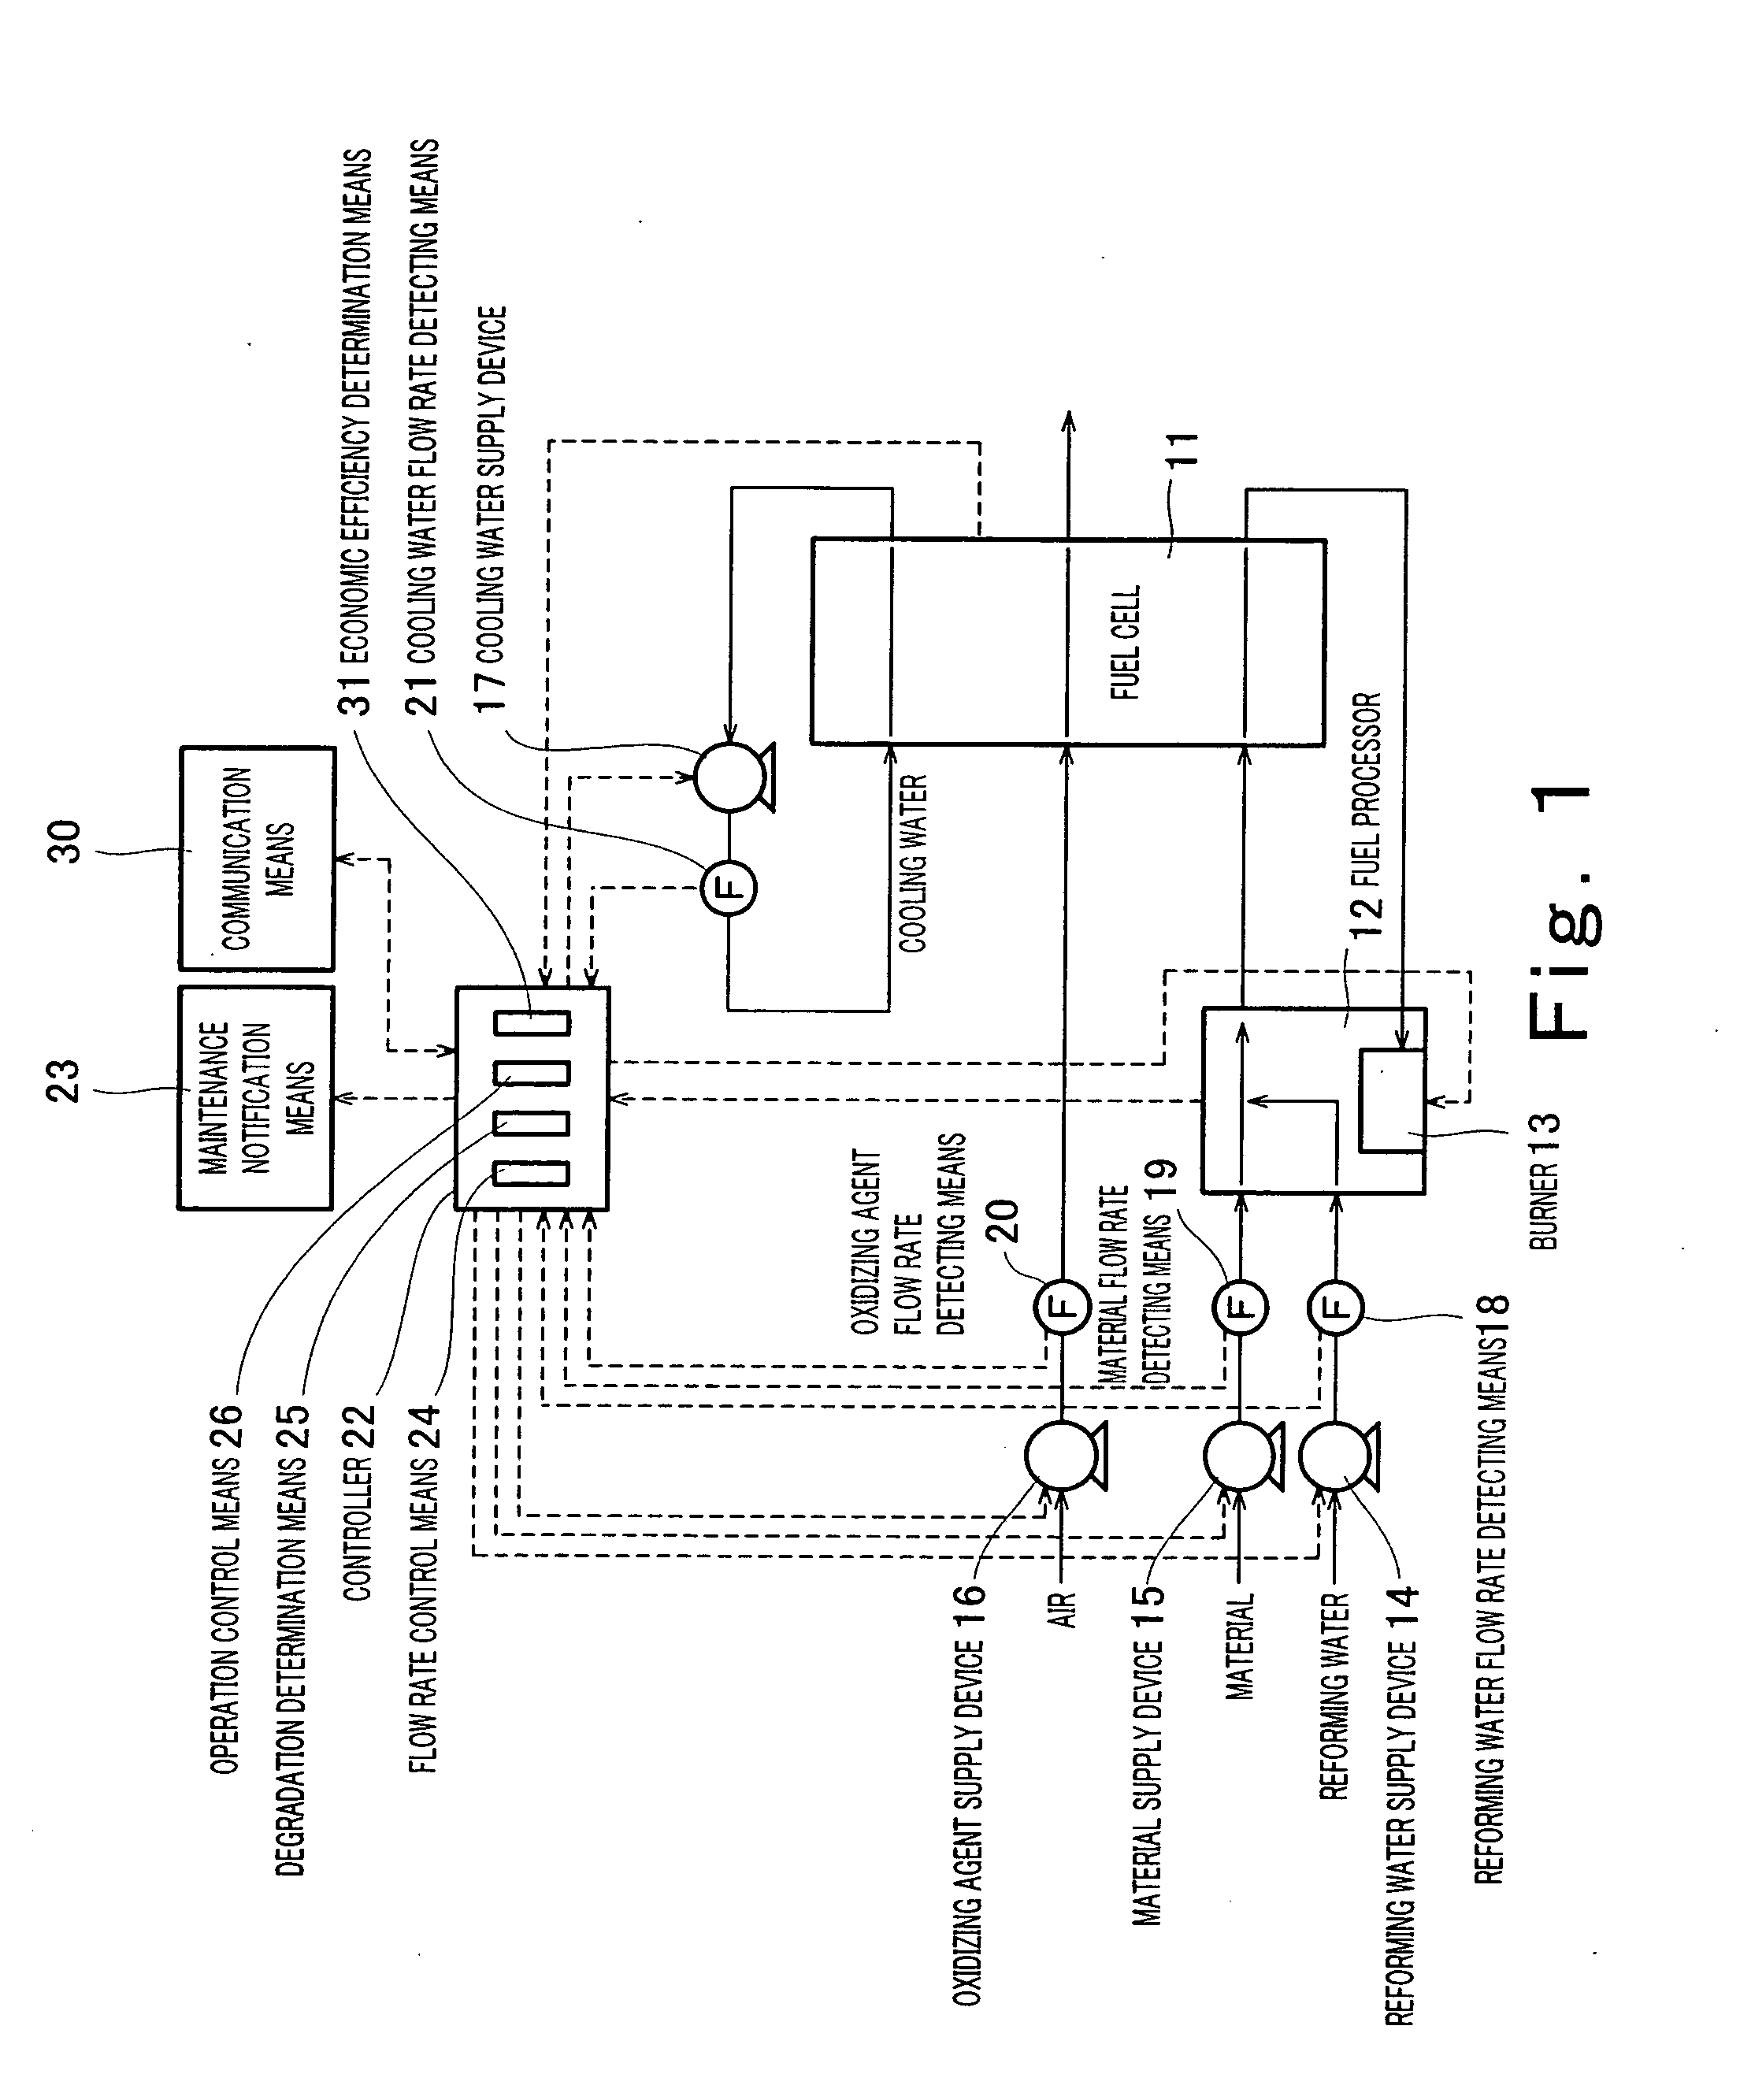 Fuel Cell Power Generation System